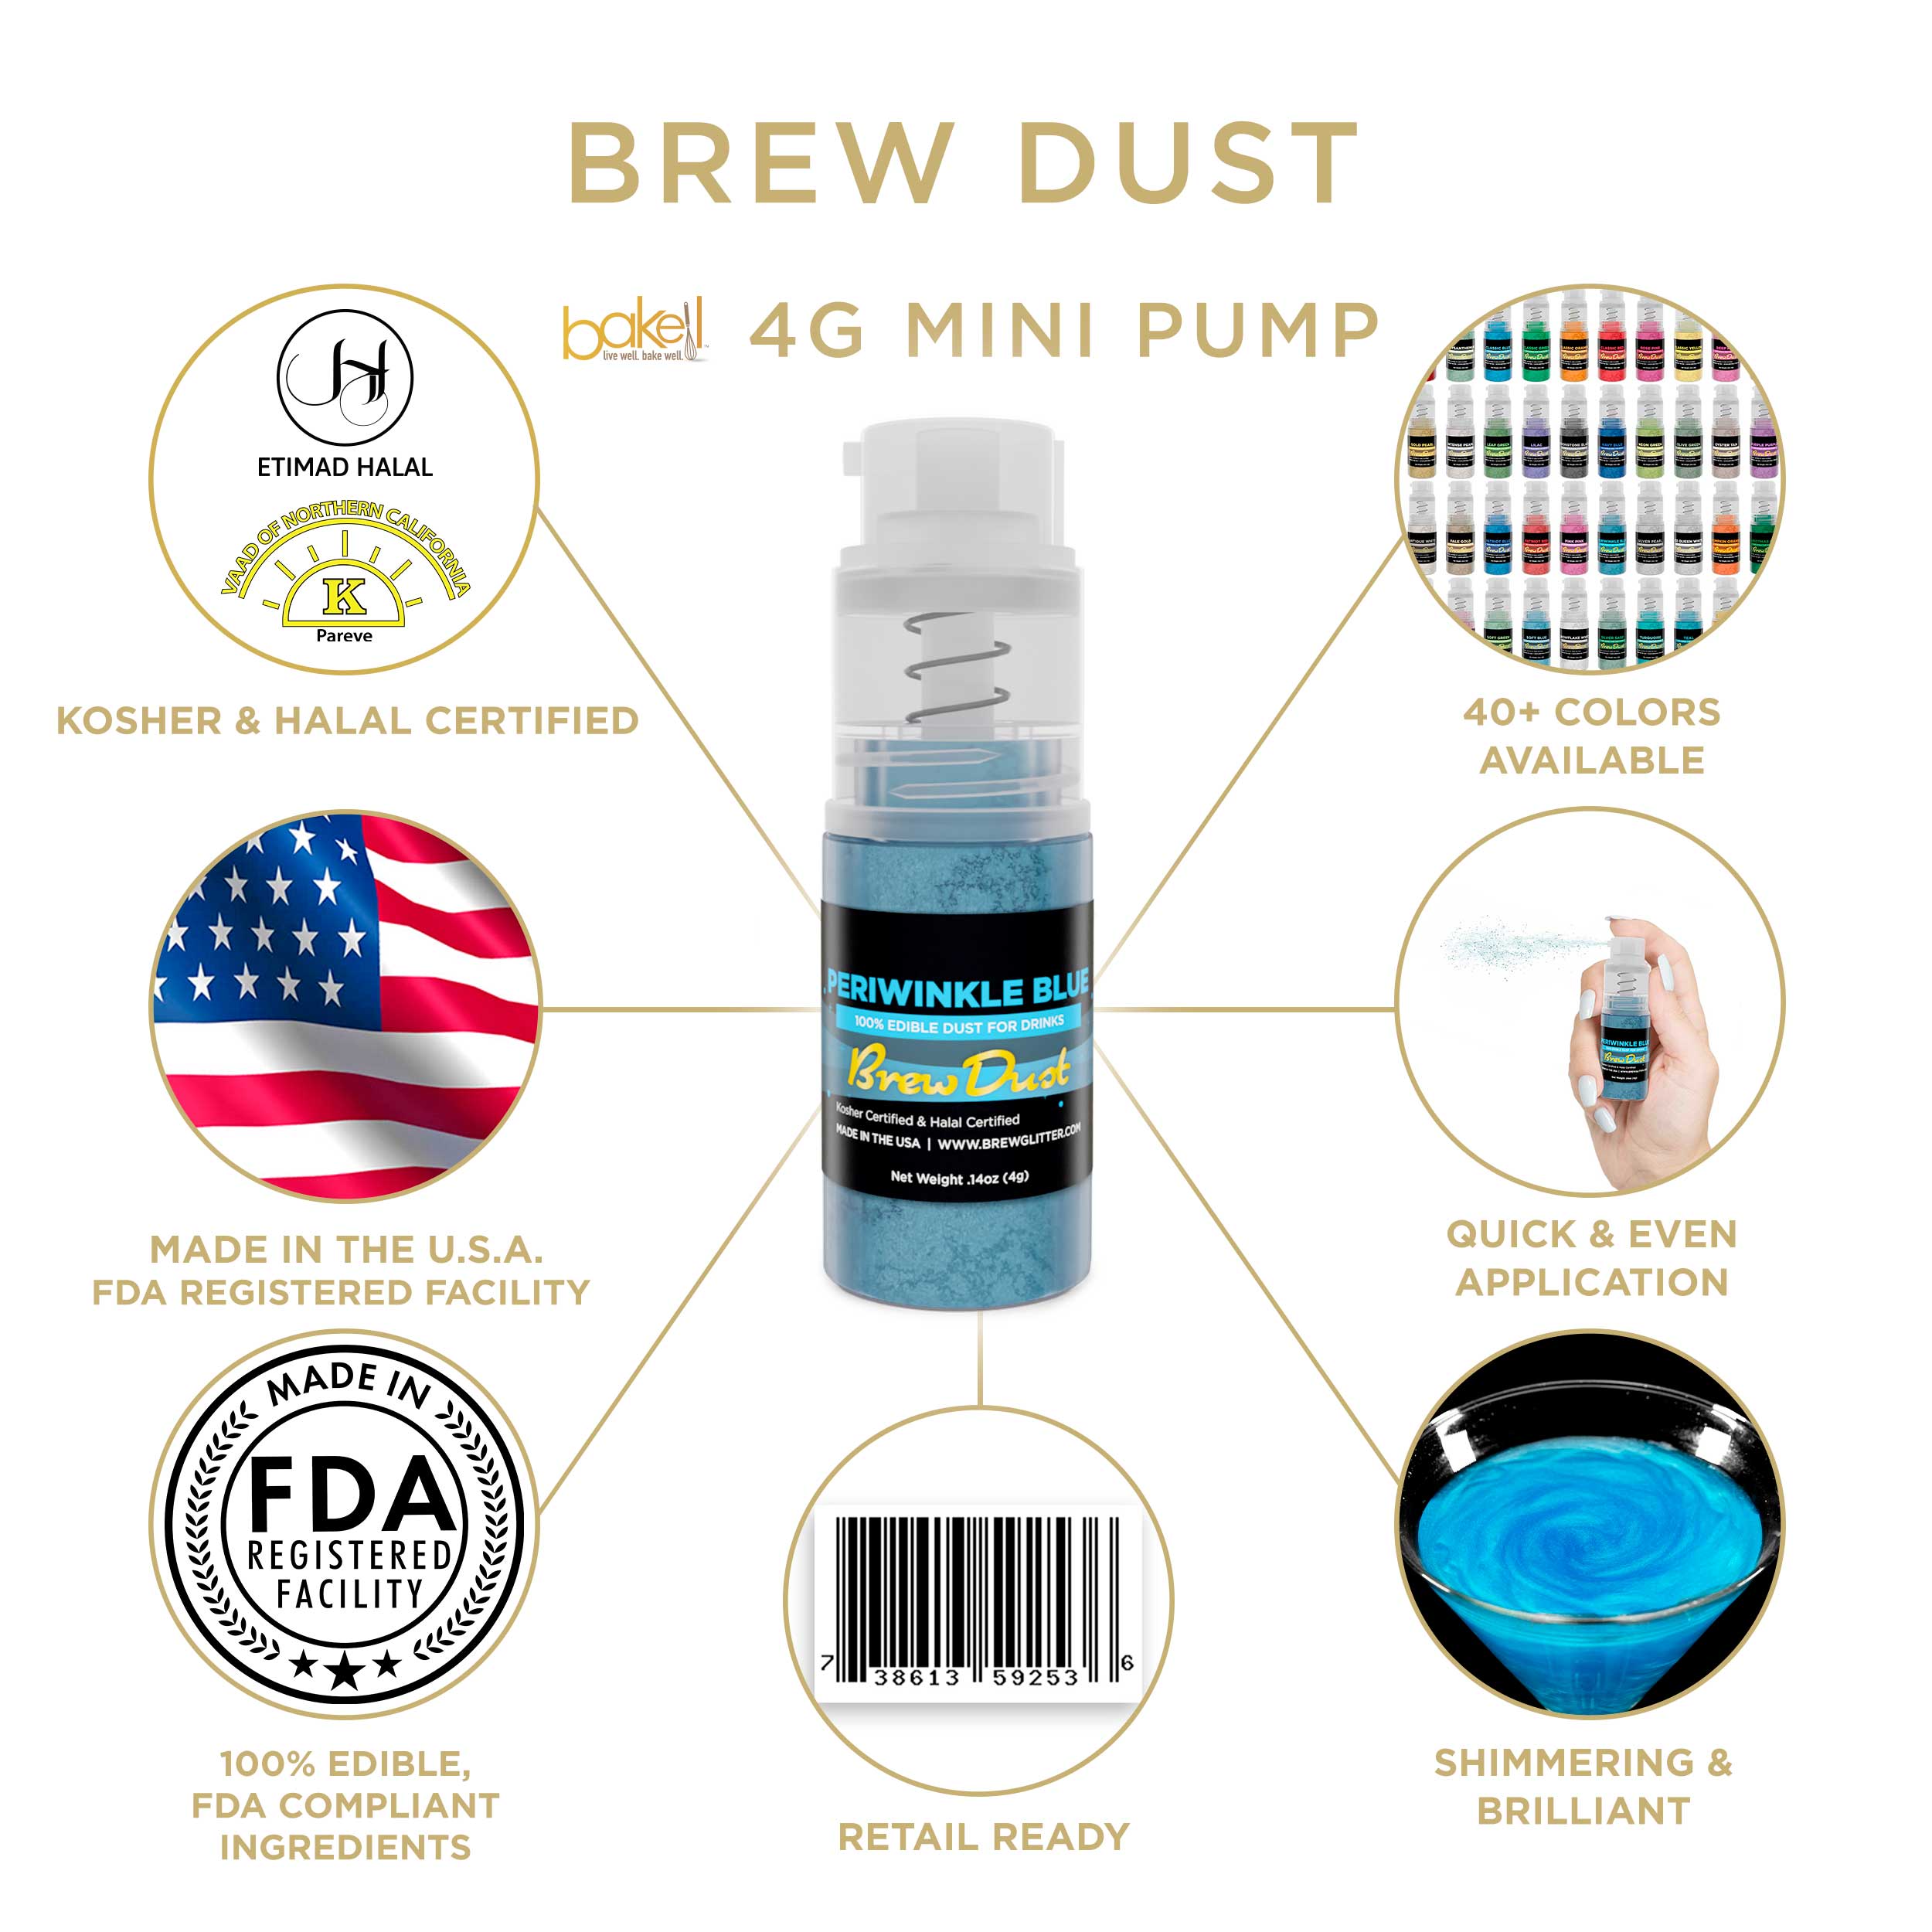 Periwinkle Blue Brew Dust Miniature Spray Pump | Infographic and Information